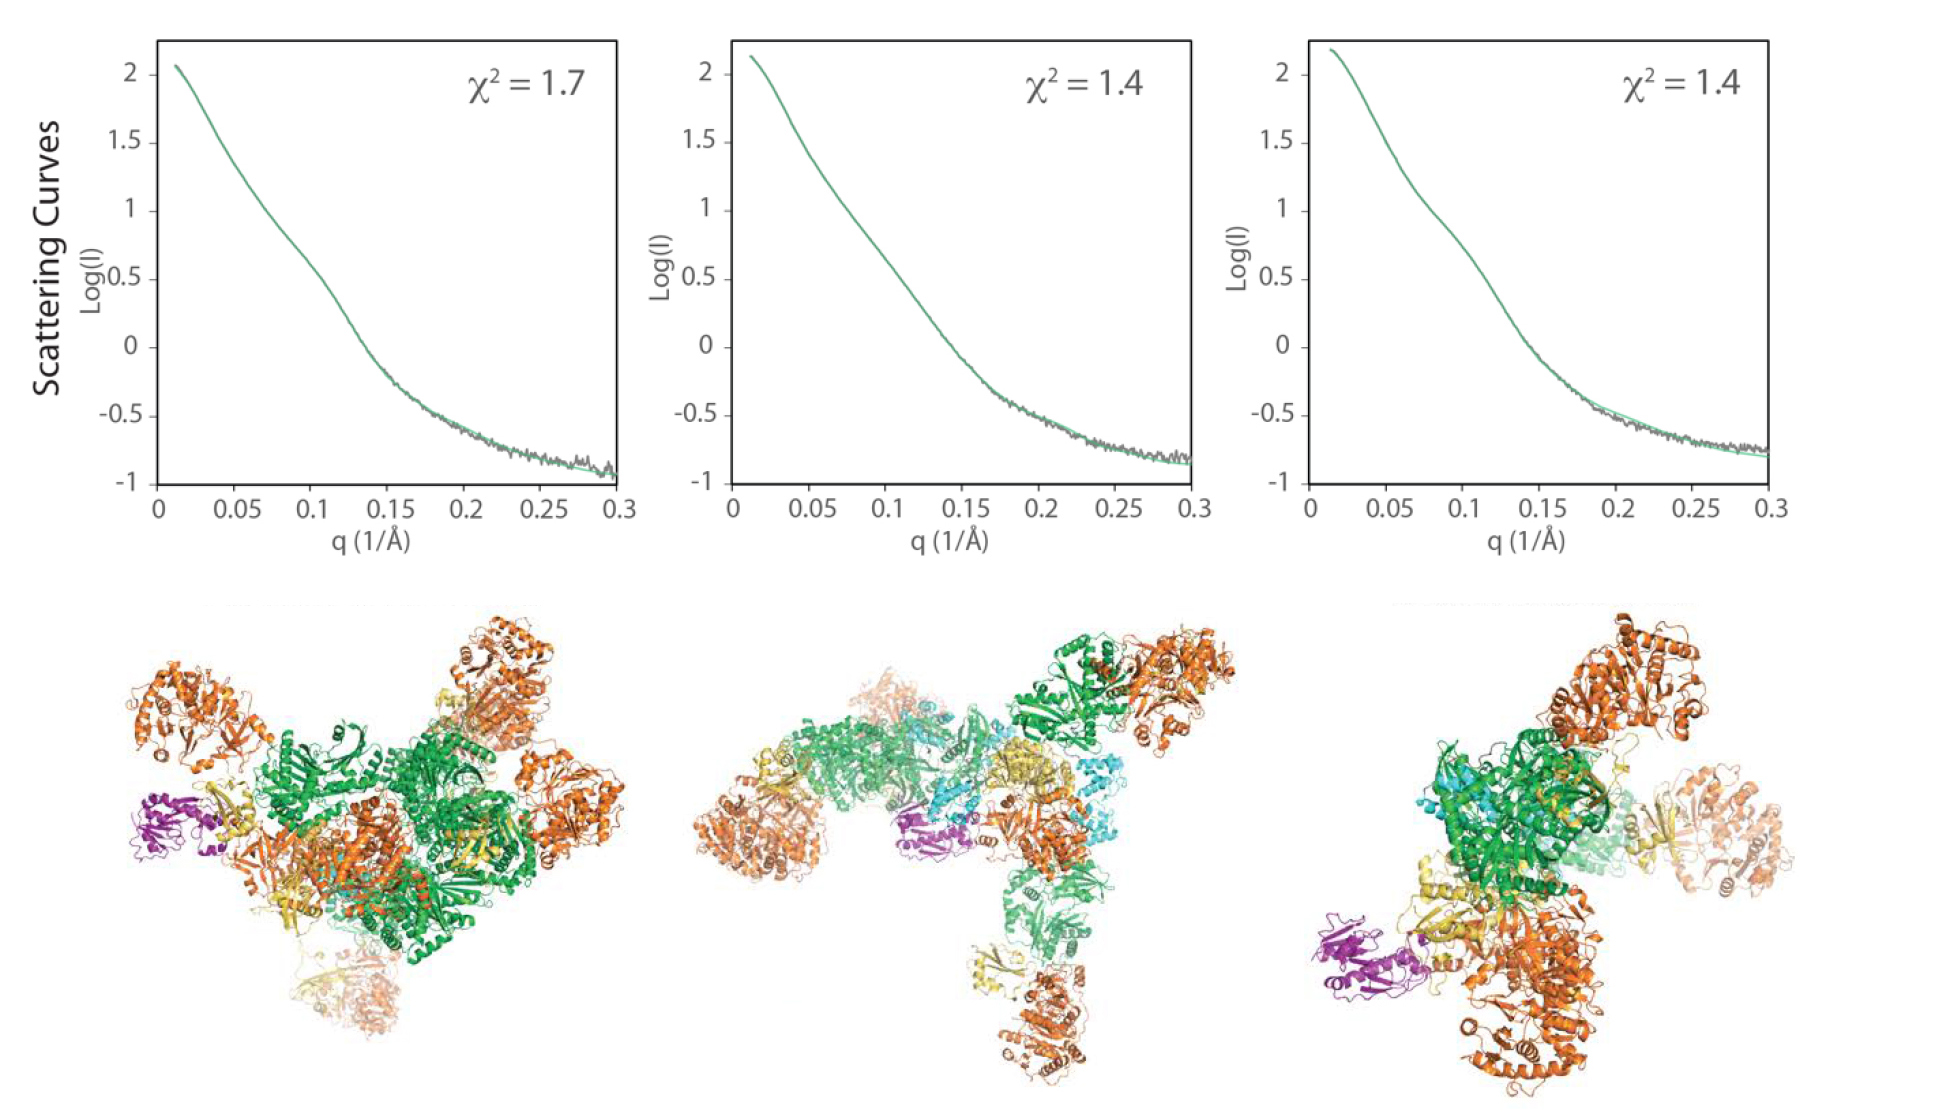 <416reimer2-alt> Top row: Three line graphs showing theoretical curves in green superimposed on closely matching experimental plots in black. Bottom row: Three similarly multicolored ribbon diagrams with very different shapes.